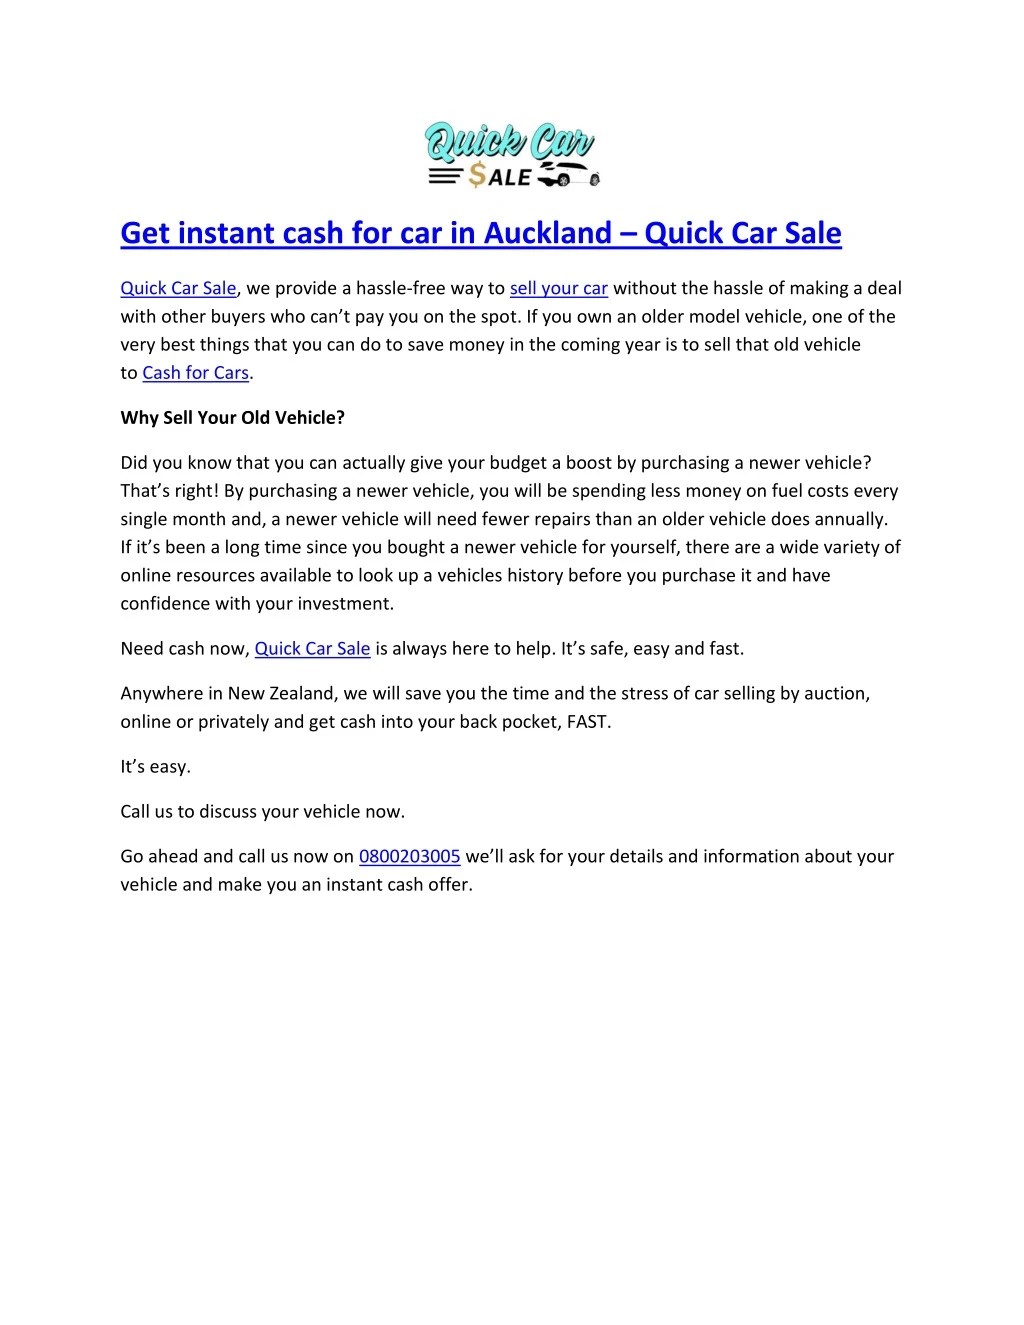 get instant cash for car in auckland quick